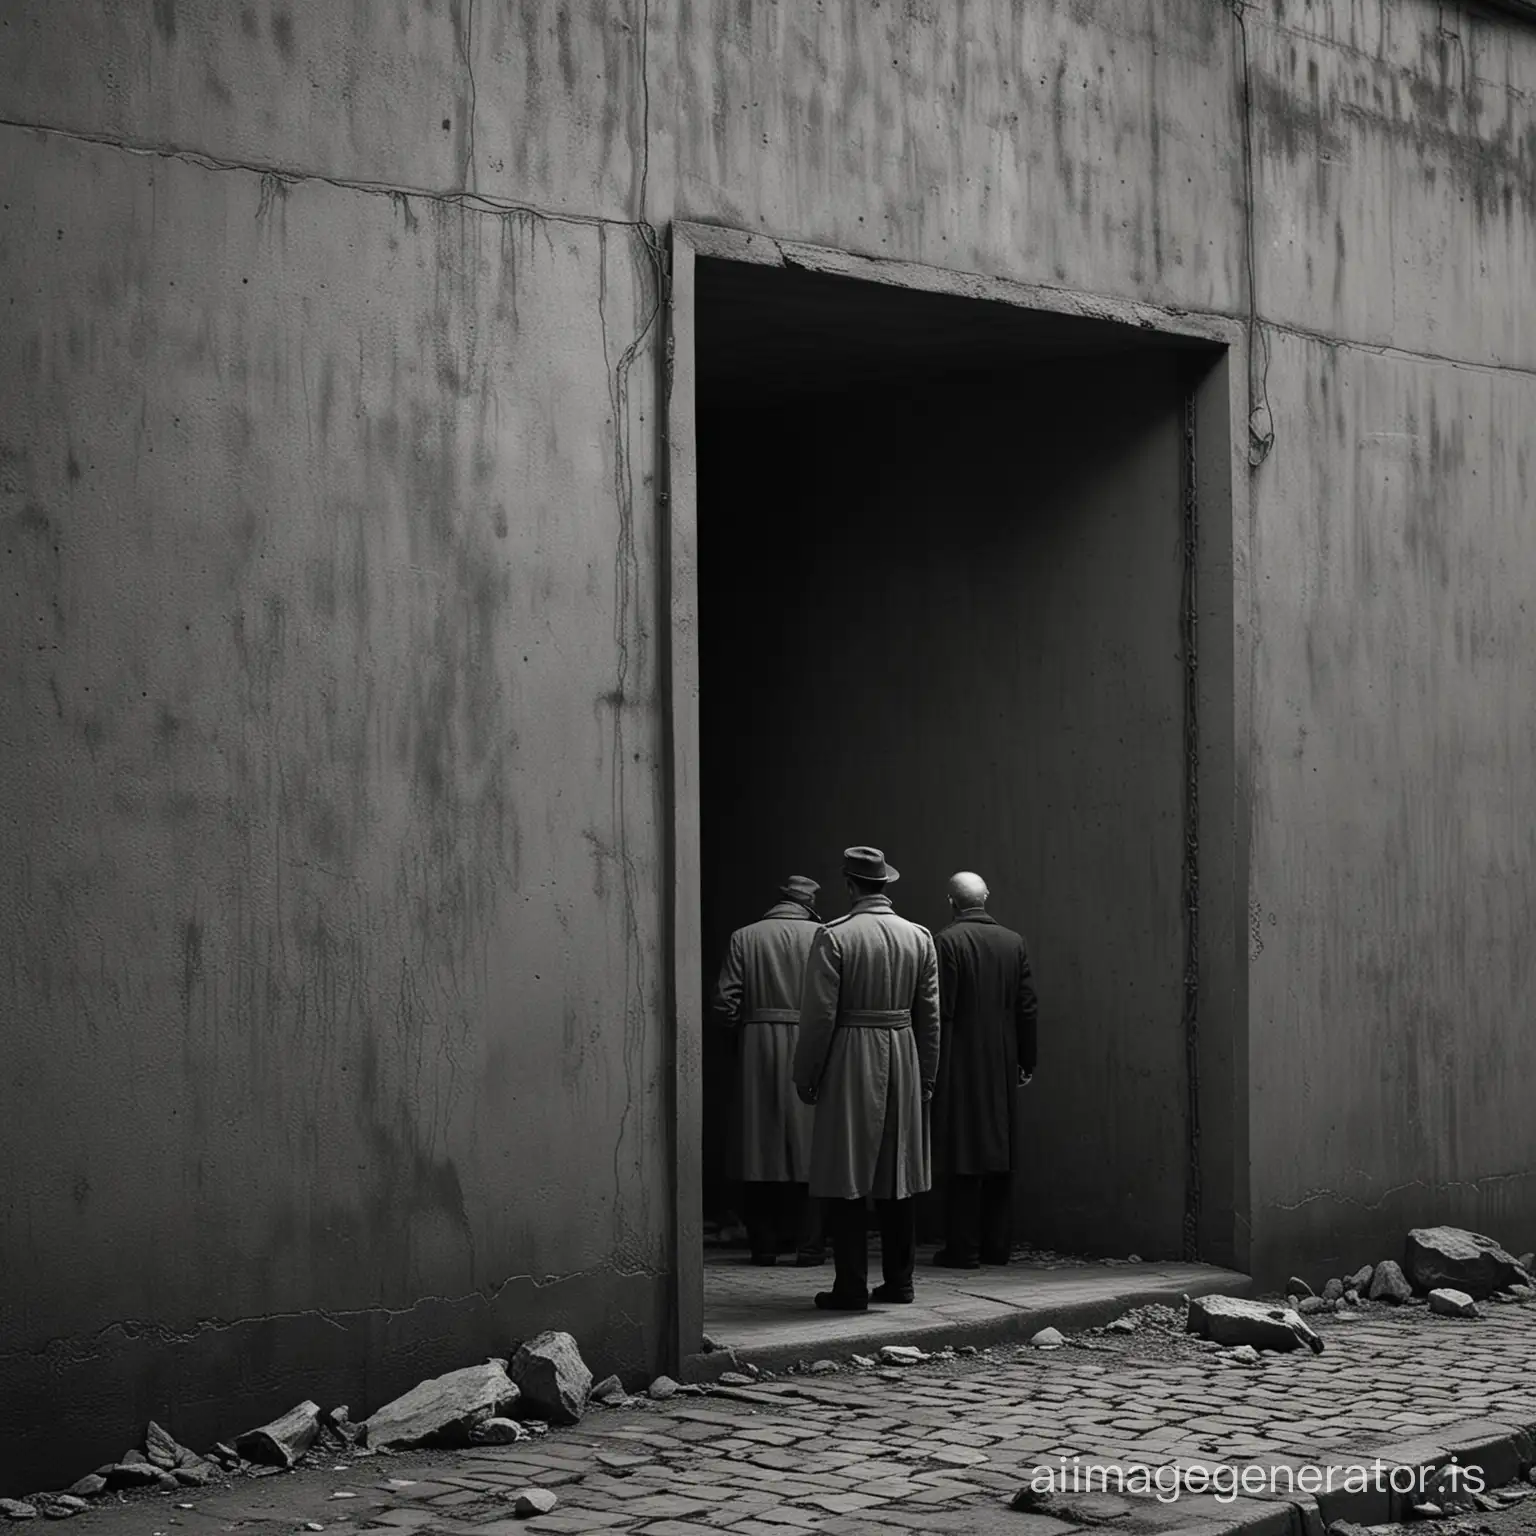 turned away, strange necropeople looking at the wall, in strange places of liminal spaces,instantly detailed and intricate,superdetailed,black and white screenshots from films noir,cine-photography, ultra realistic, Hyper detailed